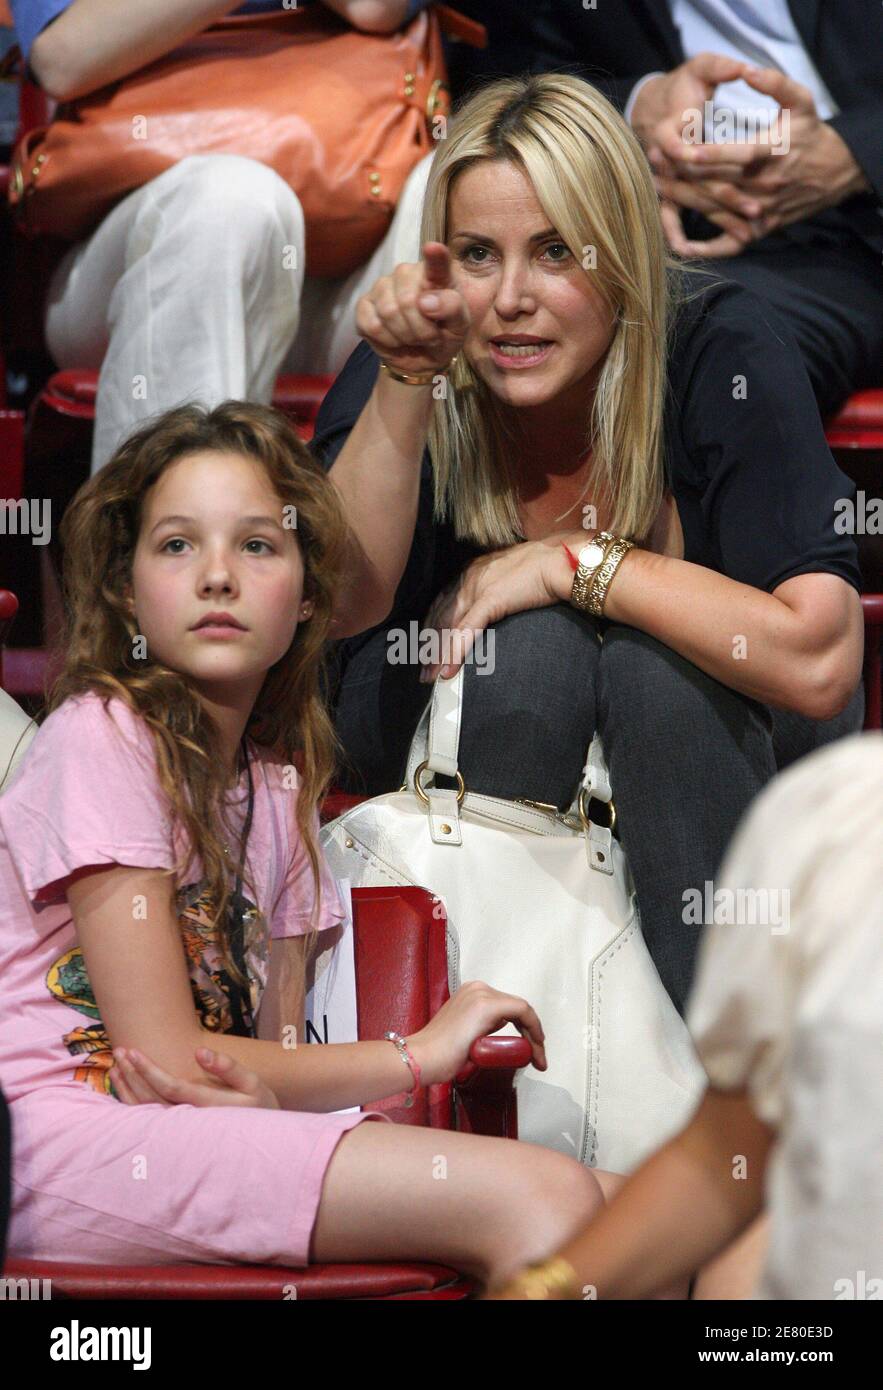 'Sophie Favier with her daughter are seen listening to Presidential frontrunner Nicolas Sarkozy adressing tens of thousands of supporters at Paris Bercy concert hall in Paris, France, April 29, 2007. Sarkozy went on the offensive Sunday, charging that he had been unjustly depicted as authoritarian as the battle for the Elysee entered its final week. The rightwinger said he had suffered ''personal attacks'' during the campaign that had targeted his ''honour, sincerity, personality and character.'' Photo By Bisson-Taamallah-Orban/ABACAPRESS.COM' Stock Photo